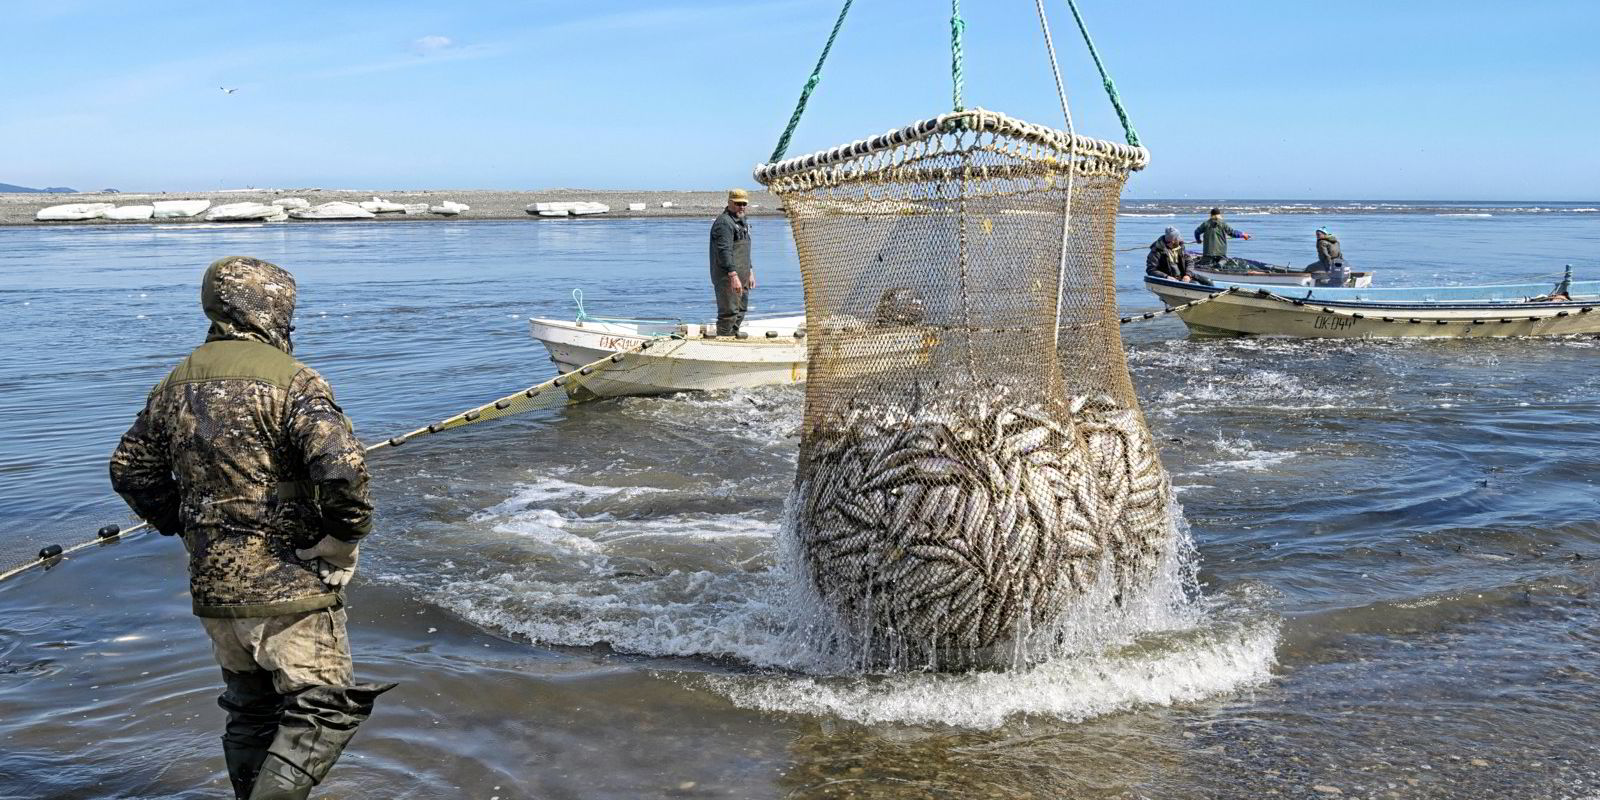 Russian herring processors hike prices in face of raw material